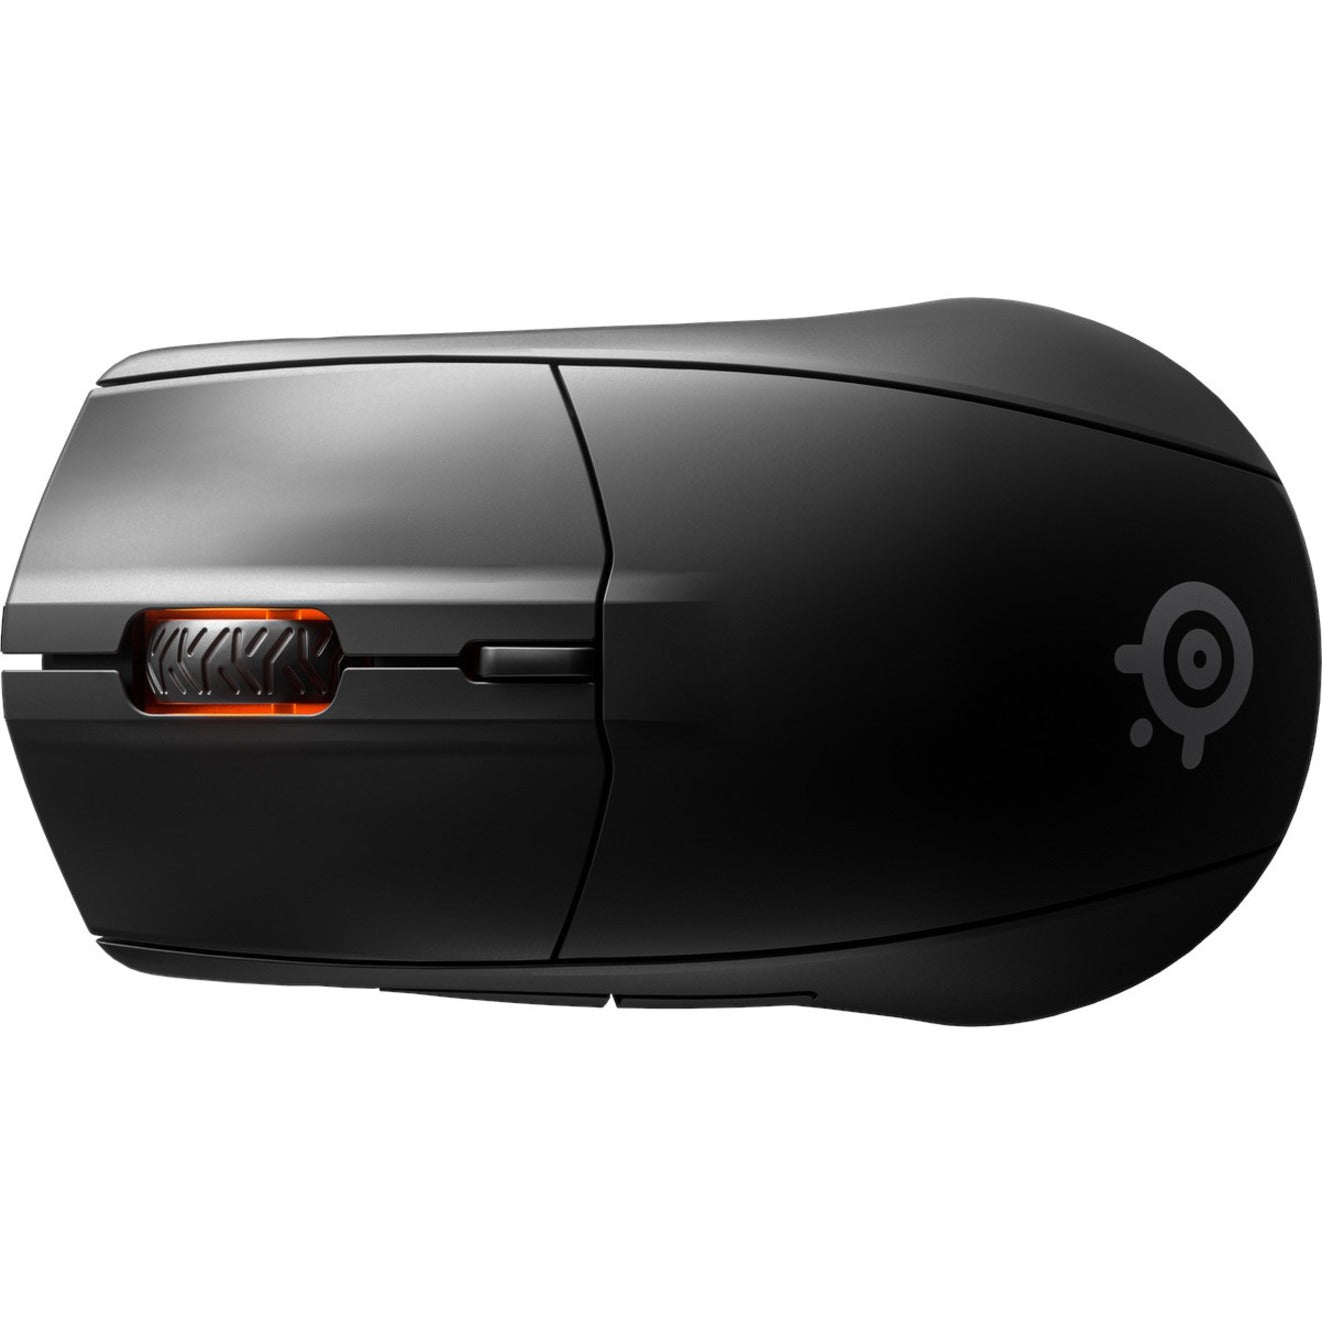 SteelSeries 62521 Rival 3 Gaming Mouse, Ergonomic Fit, 18000 dpi, Wireless Connectivity